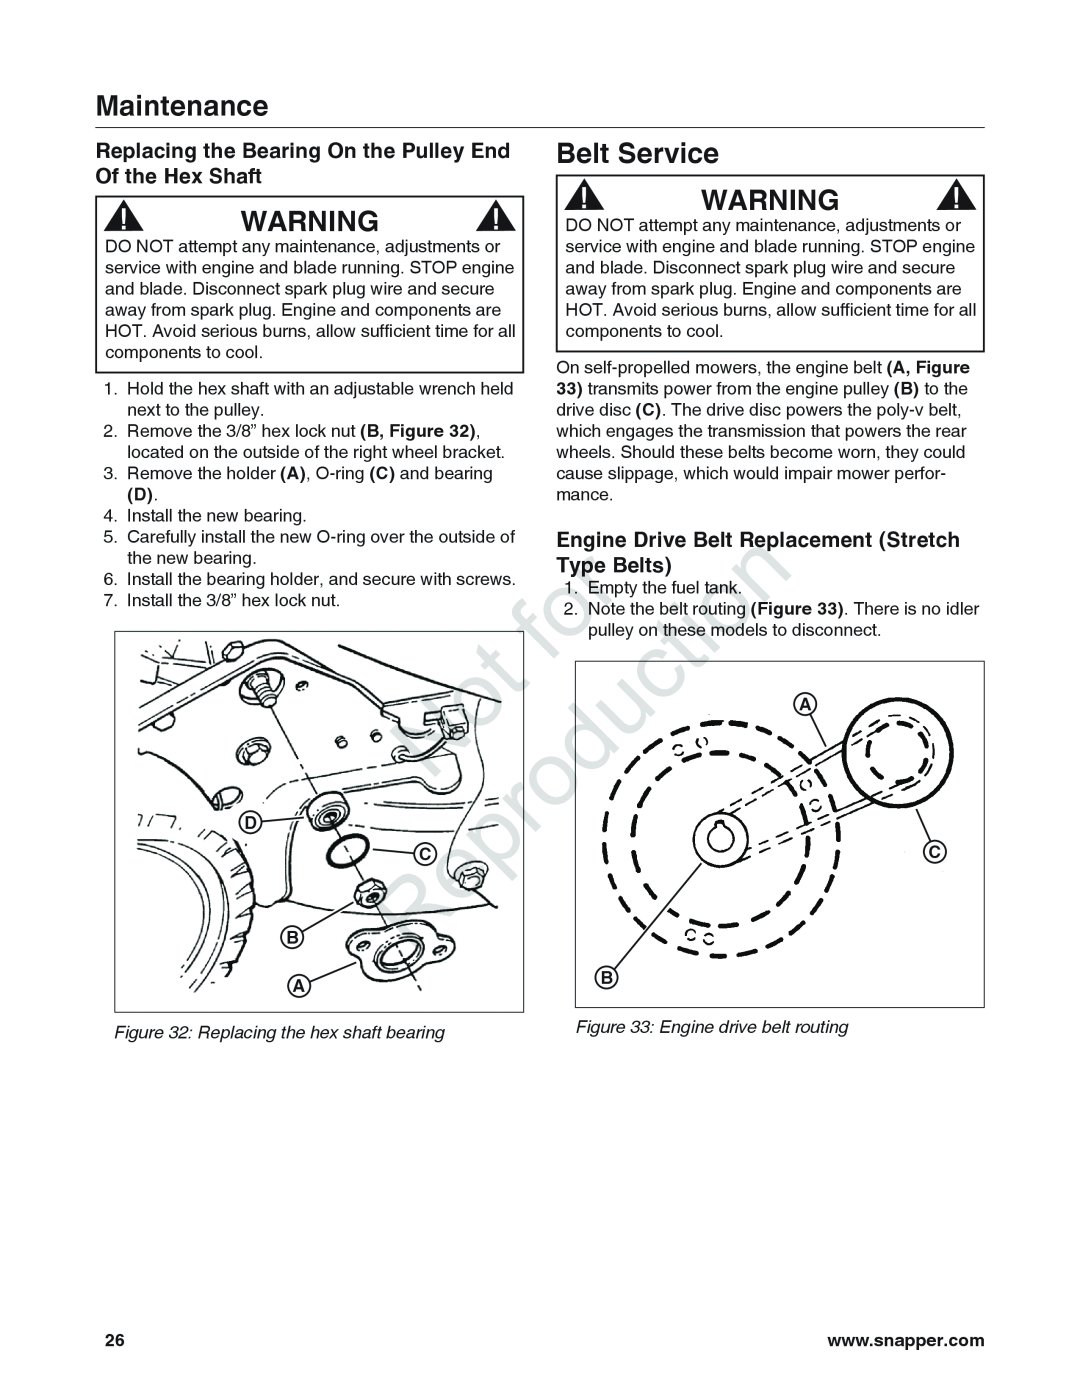 Snapper 7800849 manual Belt Service, Replacing the Bearing On the Pulley End, Of the Hex Shaft, Type Belts, Maintenance 